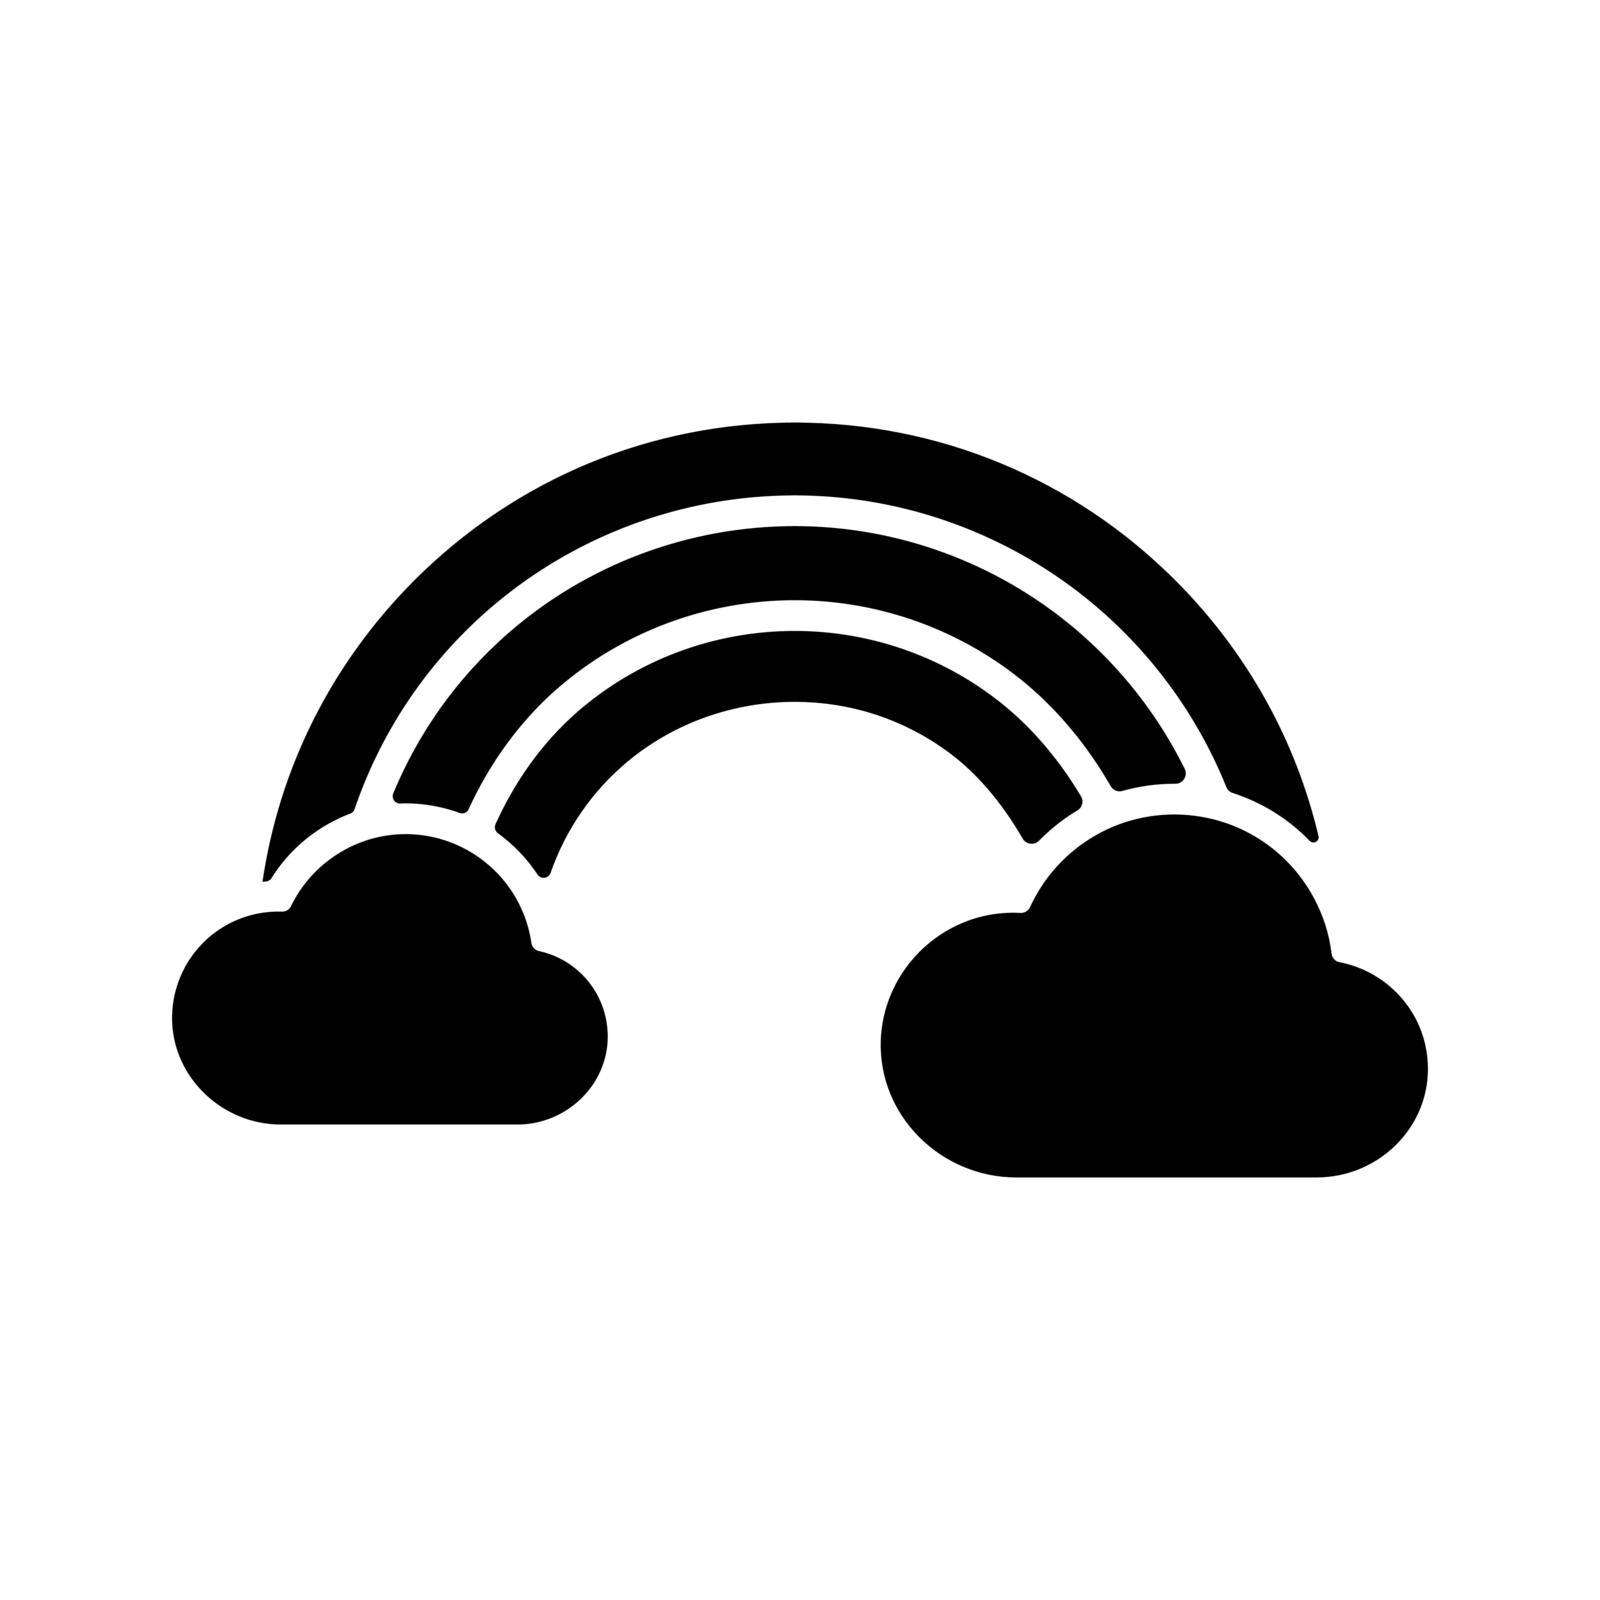 Rainbow and cloud vector glyph icon. Weather sign by nosik